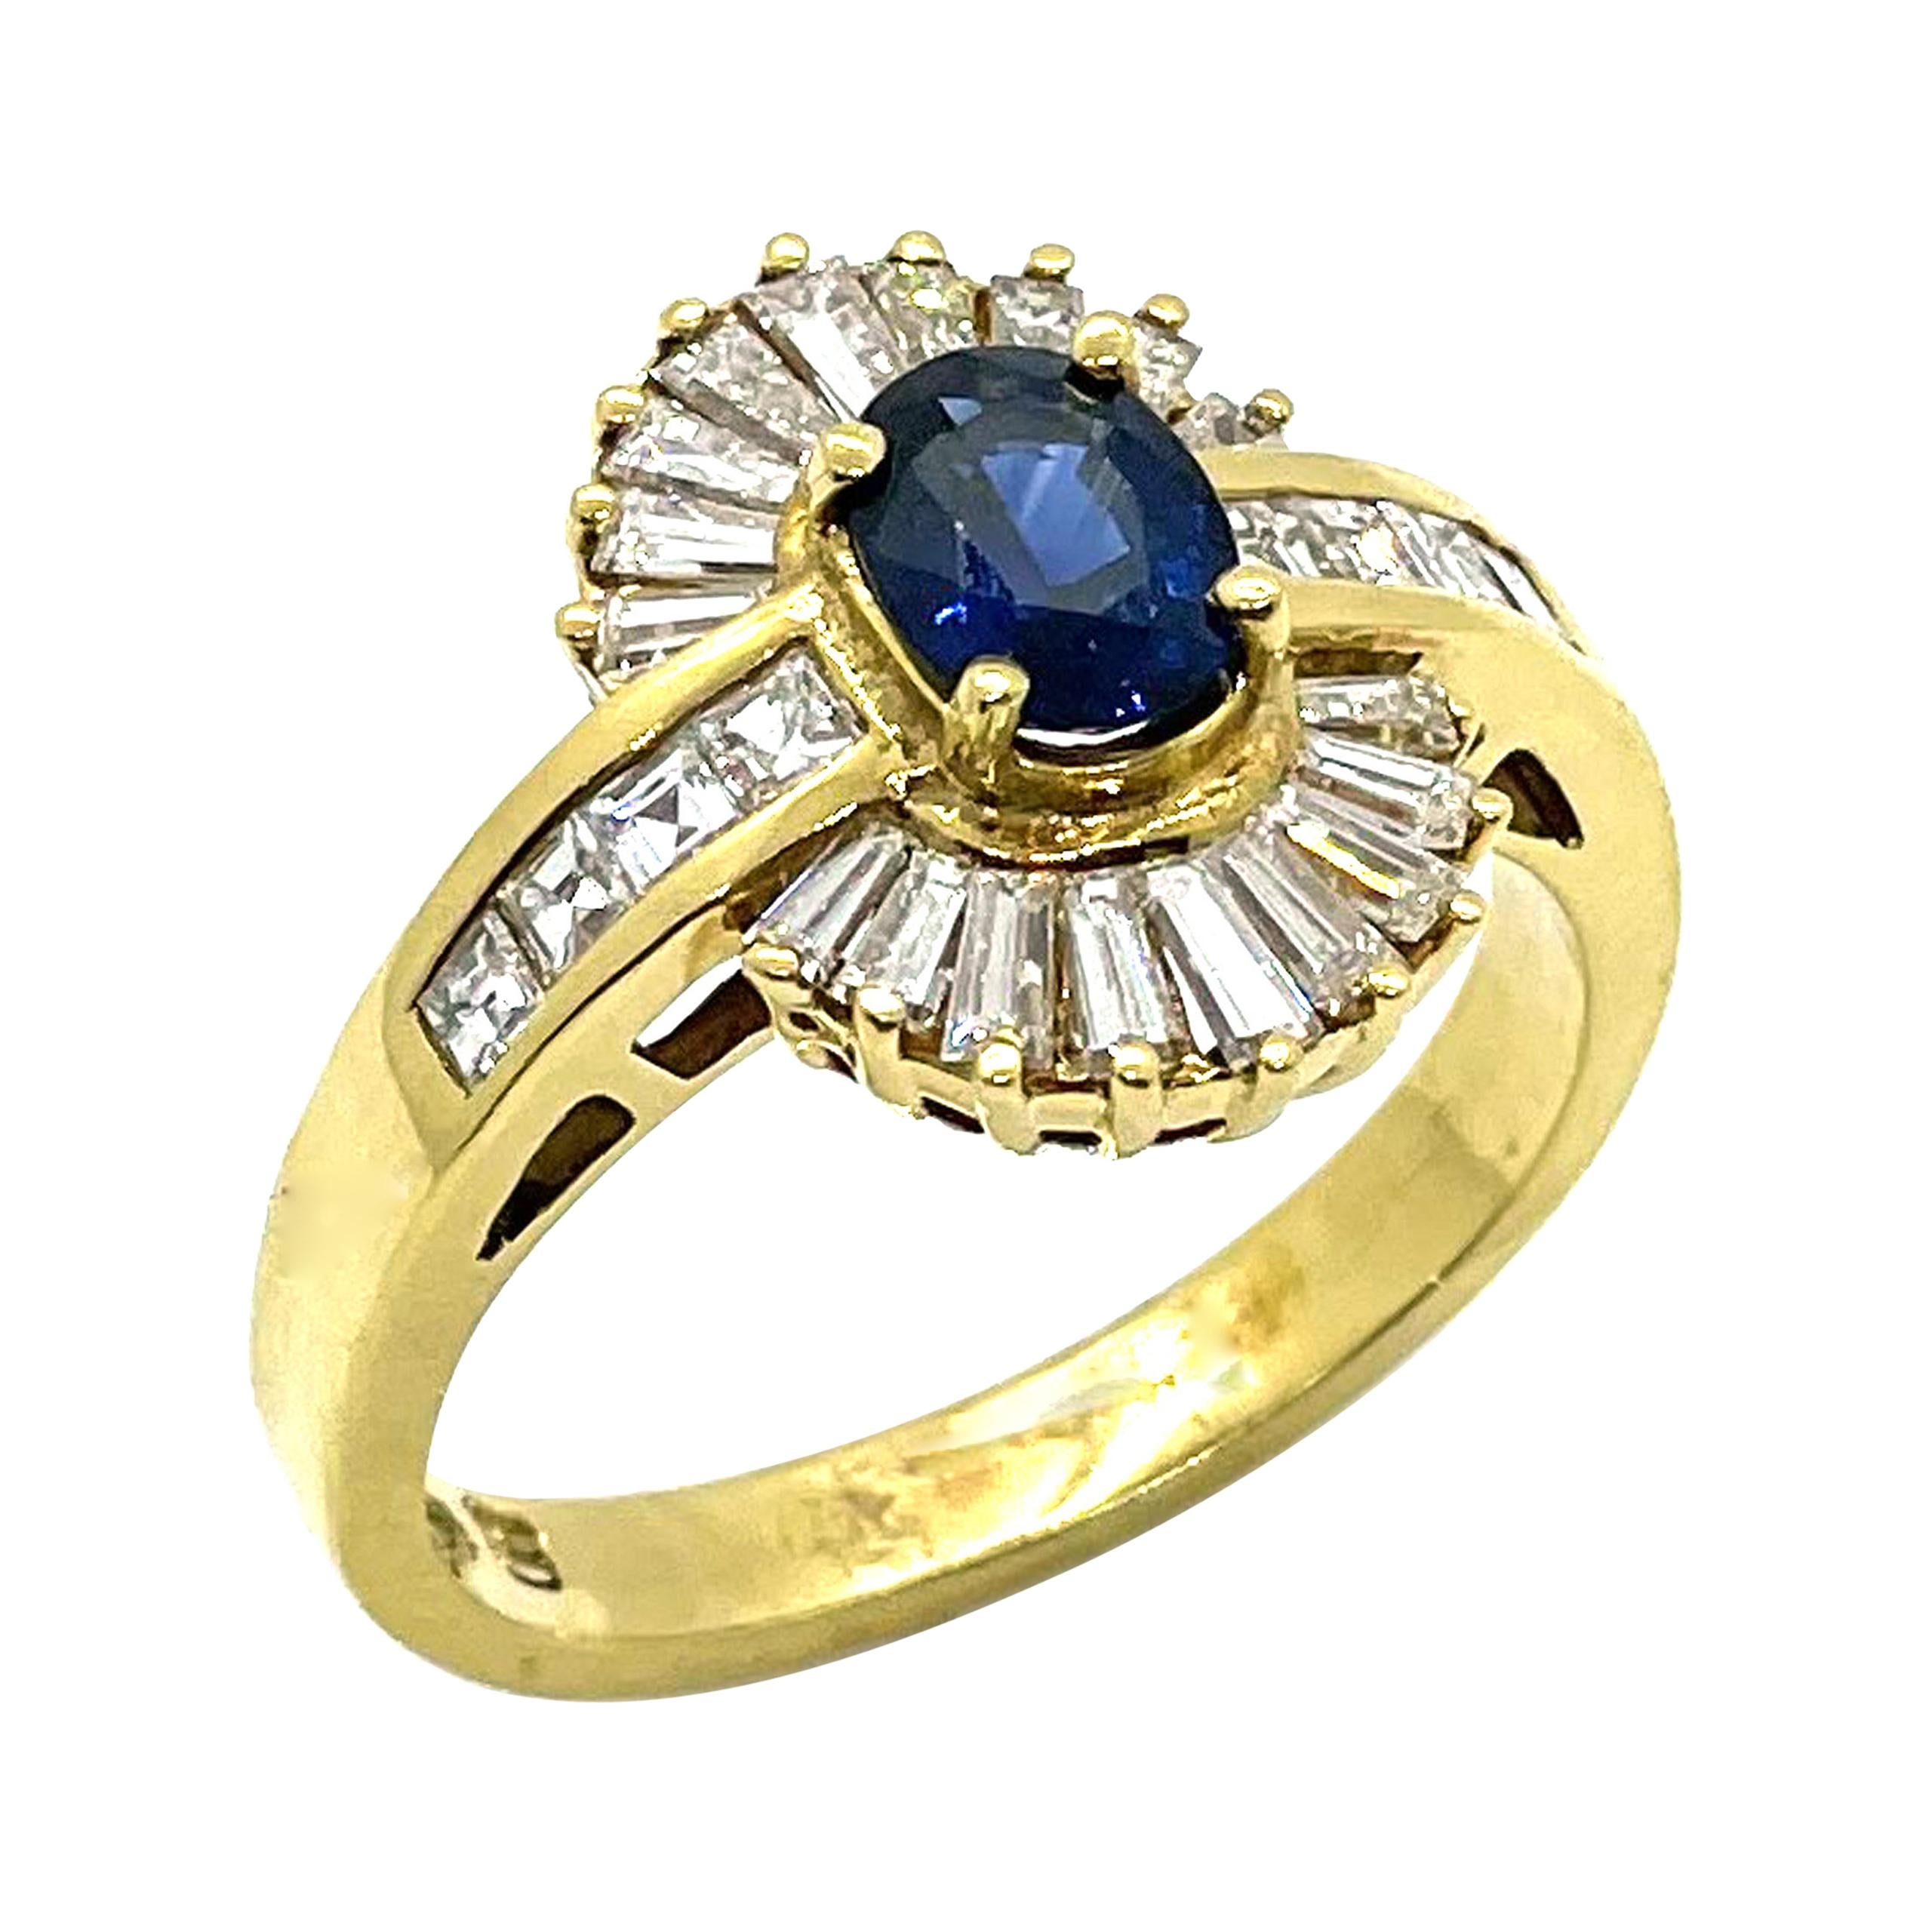 Vintage Sapphire Ring with Baguette Diamonds Set in 18k Gold, Circa 1985